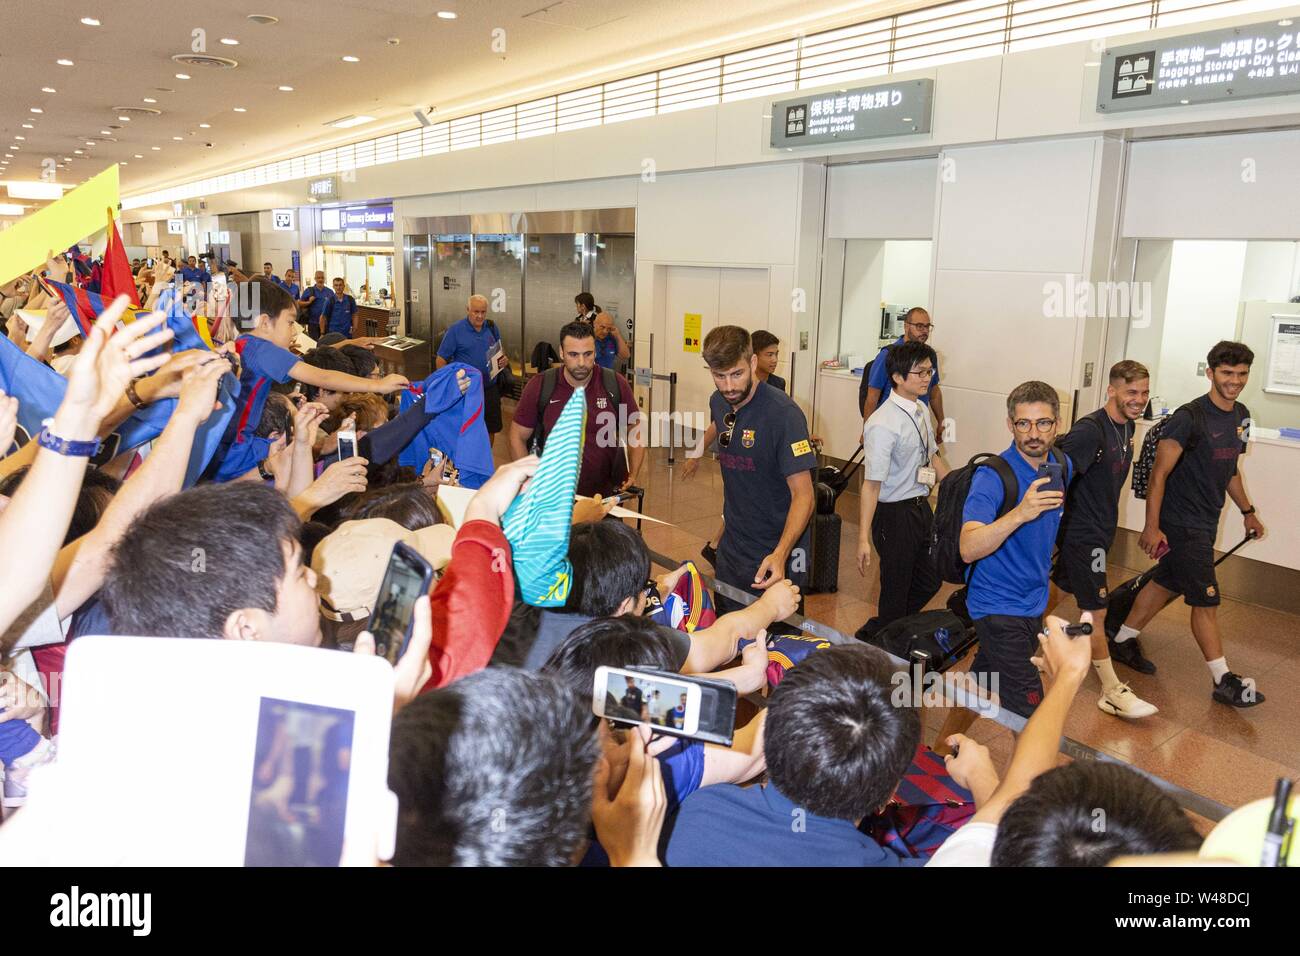 Tokyo, Japan. 21st July, 2019. FC Barcelona player Gerard Pique Bernabeu (C) arrives at Tokyo International Airport. FC Barcelona team came to Japan to play in the Rakuten Cup. Many Japanese fans waited with cameras, shirts and autograph boards to welcome the team at the airport. Credit: Rodrigo Reyes Marin/ZUMA Wire/Alamy Live News Stock Photo